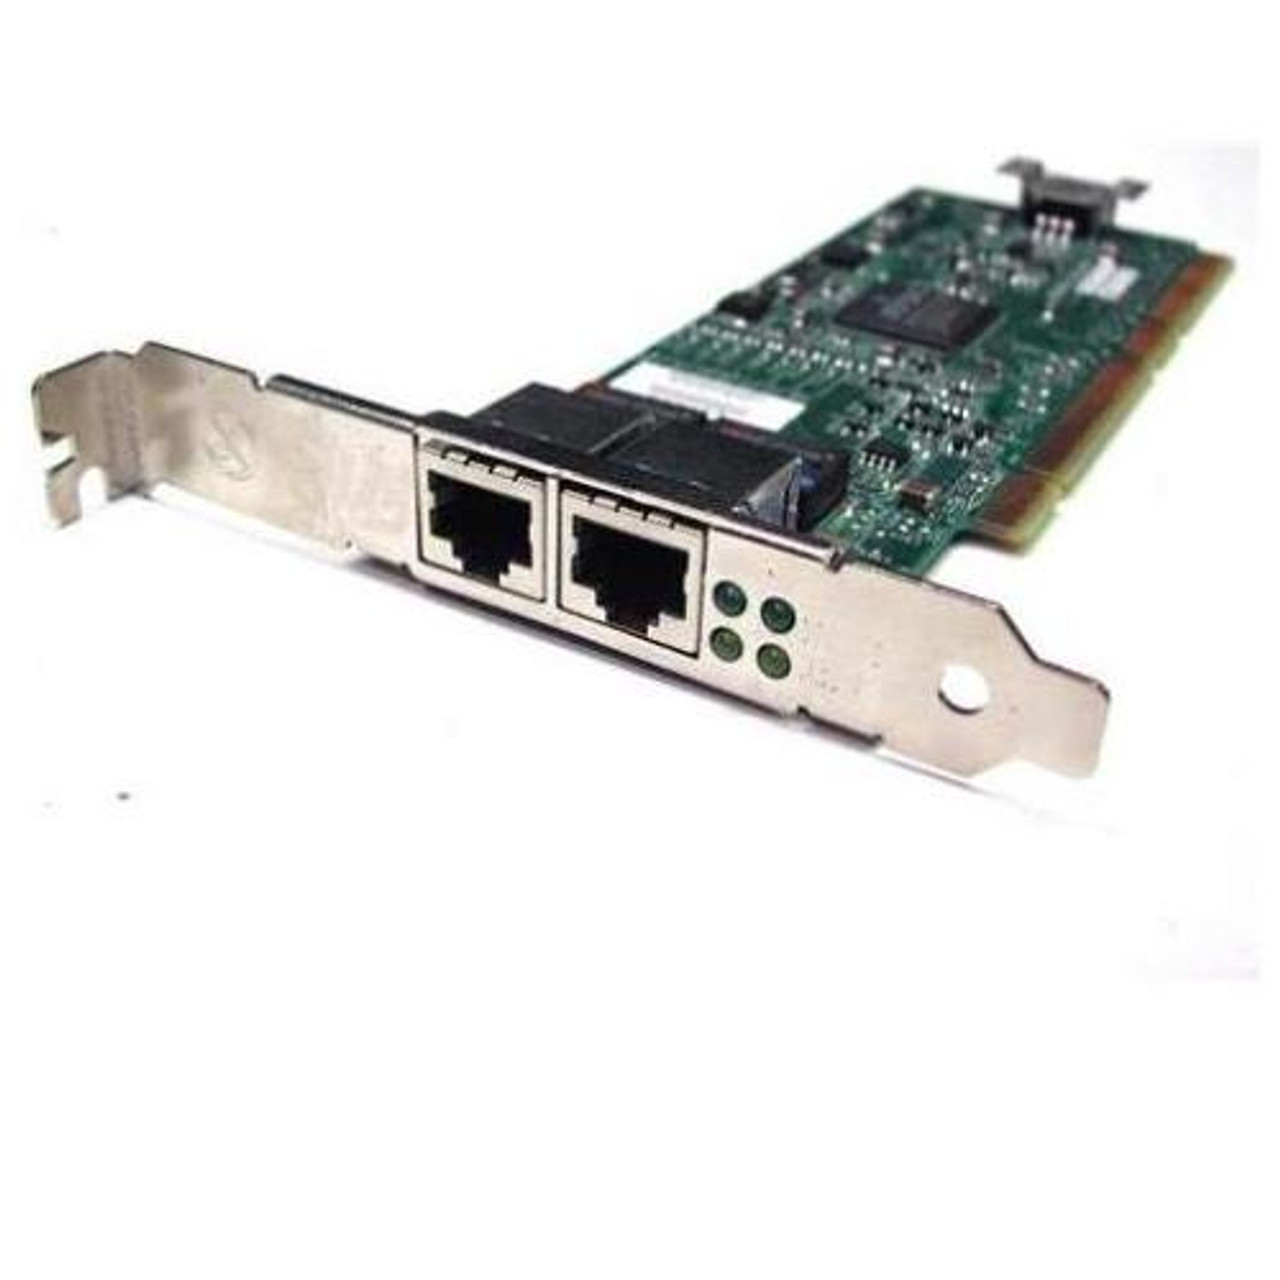 00D1996 IBM VFA5 ML2 Dual-Ports SFP+ 10Gbps Gigabit Ethernet Network Adapter by Emulex